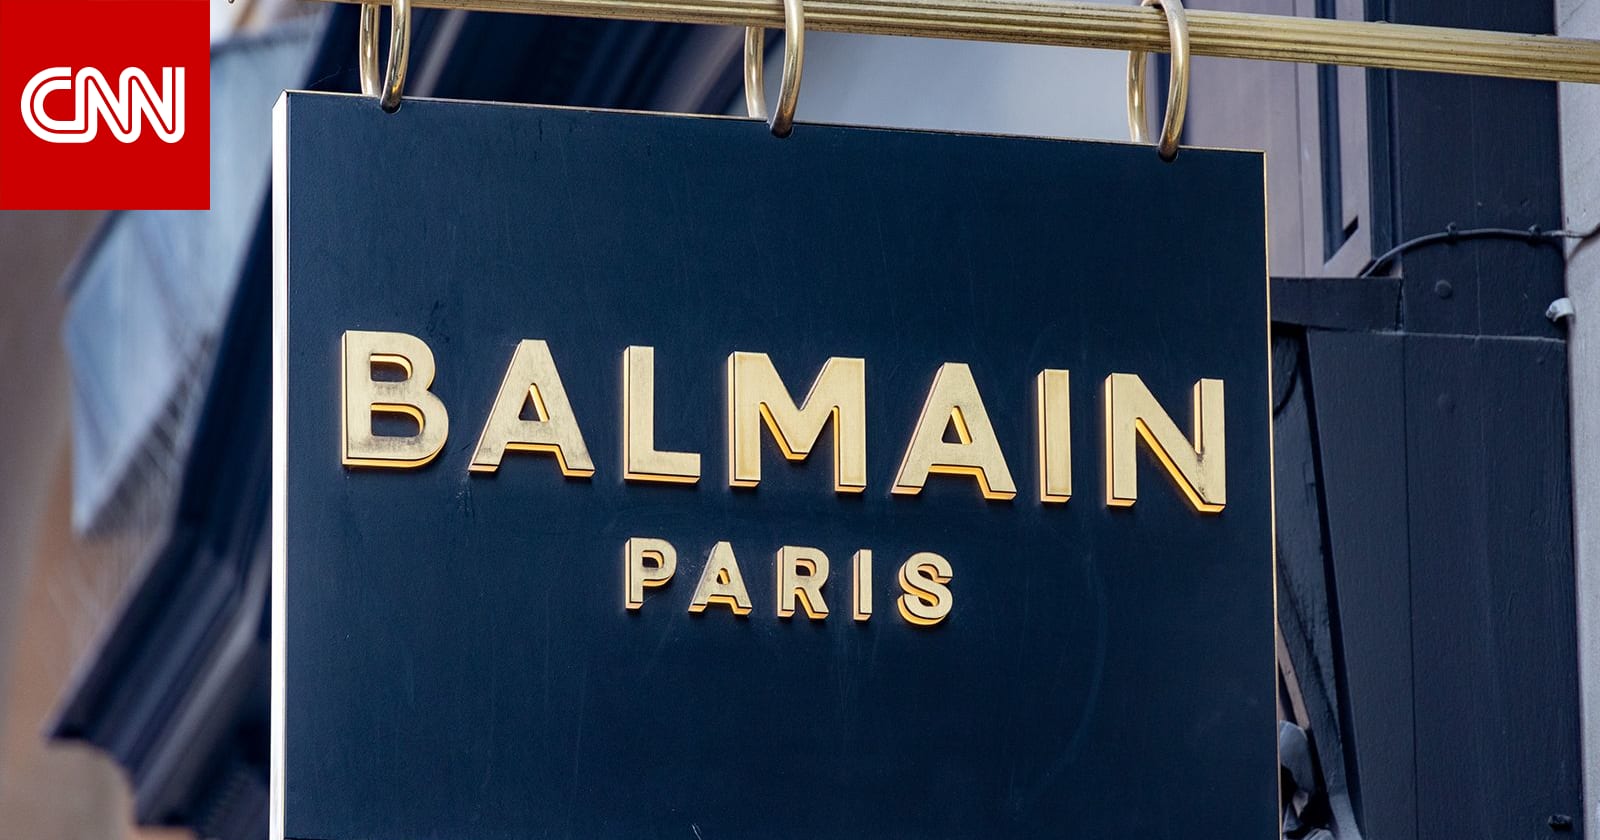 A truck carrying Balmain fashion brand’s new collection has been stolen in Paris